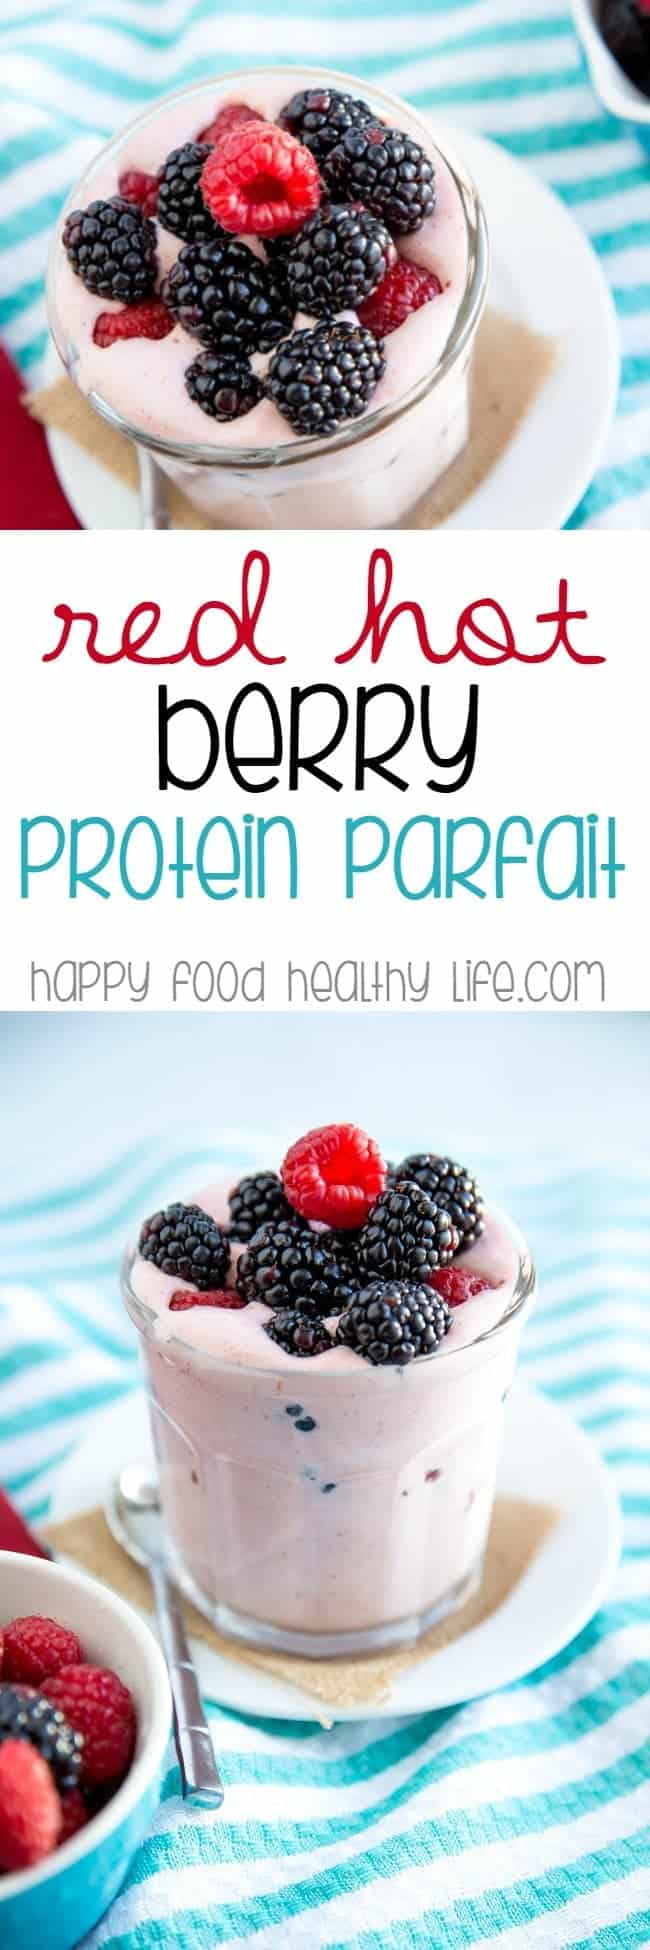 These Red Hot Berry Protein Parfaits have a kick of spice that will get your metabolism working in no time. This is the easiest breakfast or snack, especially for those who don't have much time in the mornings. Click through to get one of the best parfaits you'll ever have!